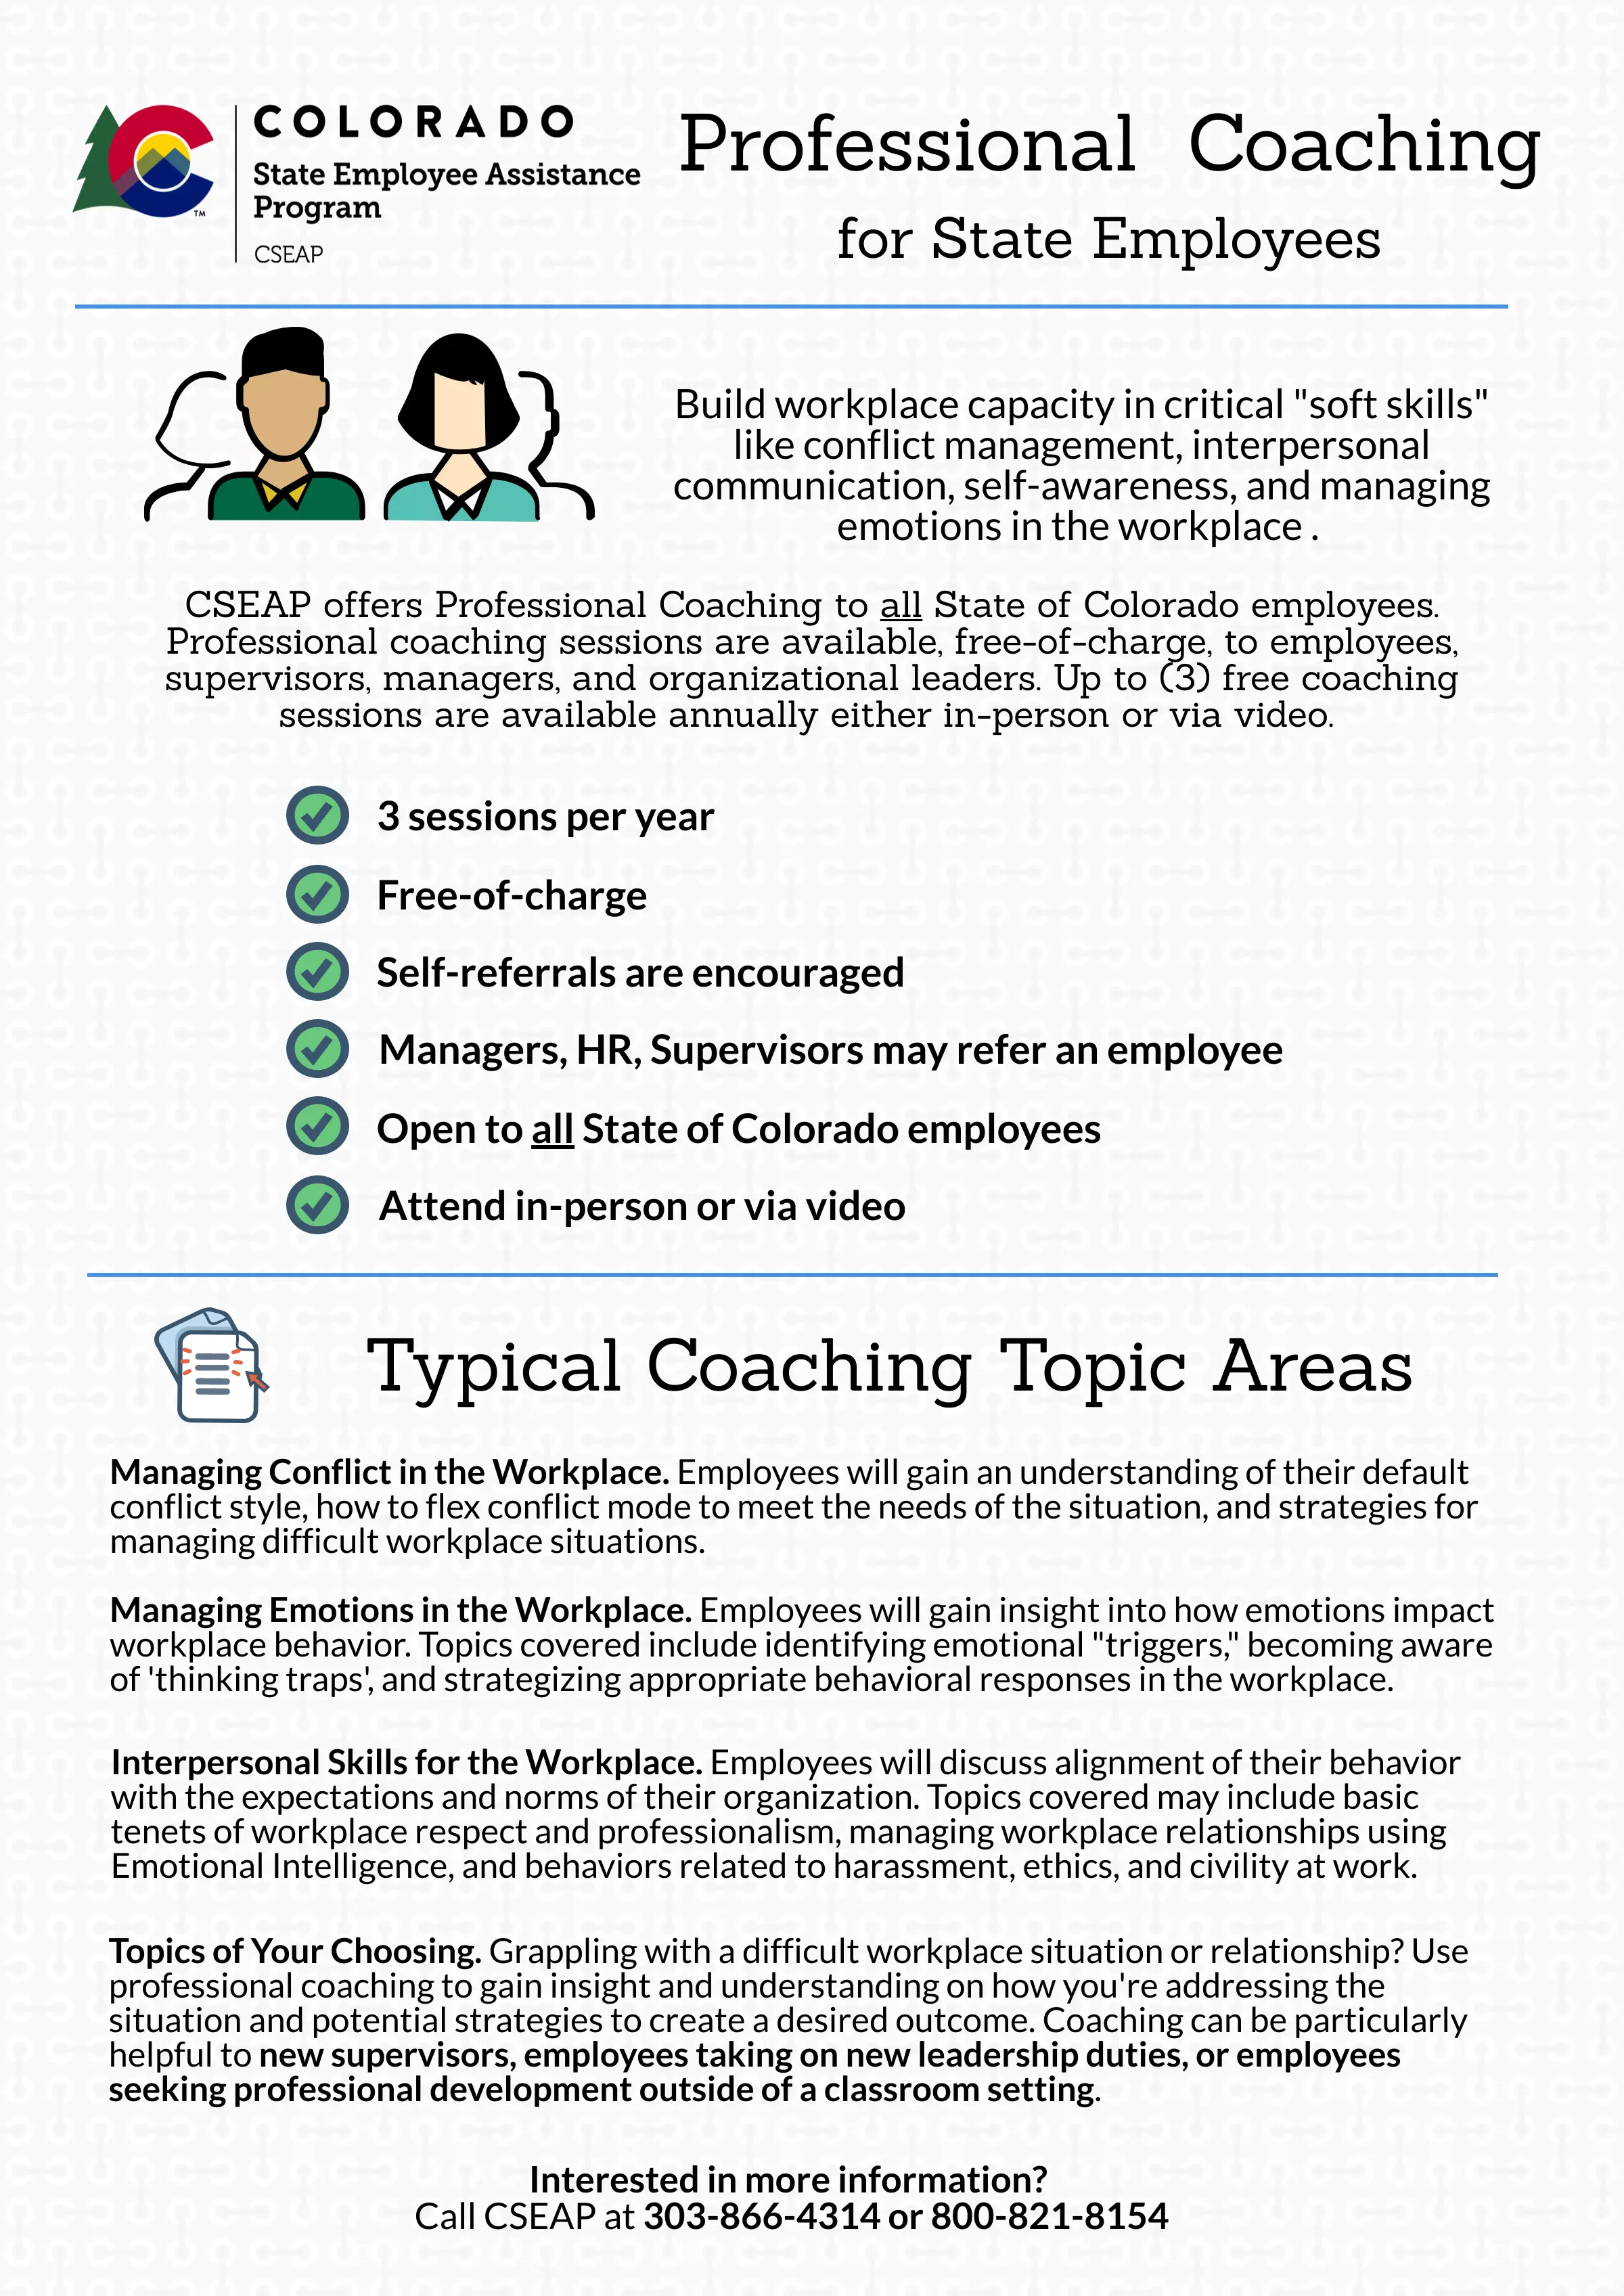 State employees can access 3 professional coaching sessions per year to address soft skills development. 